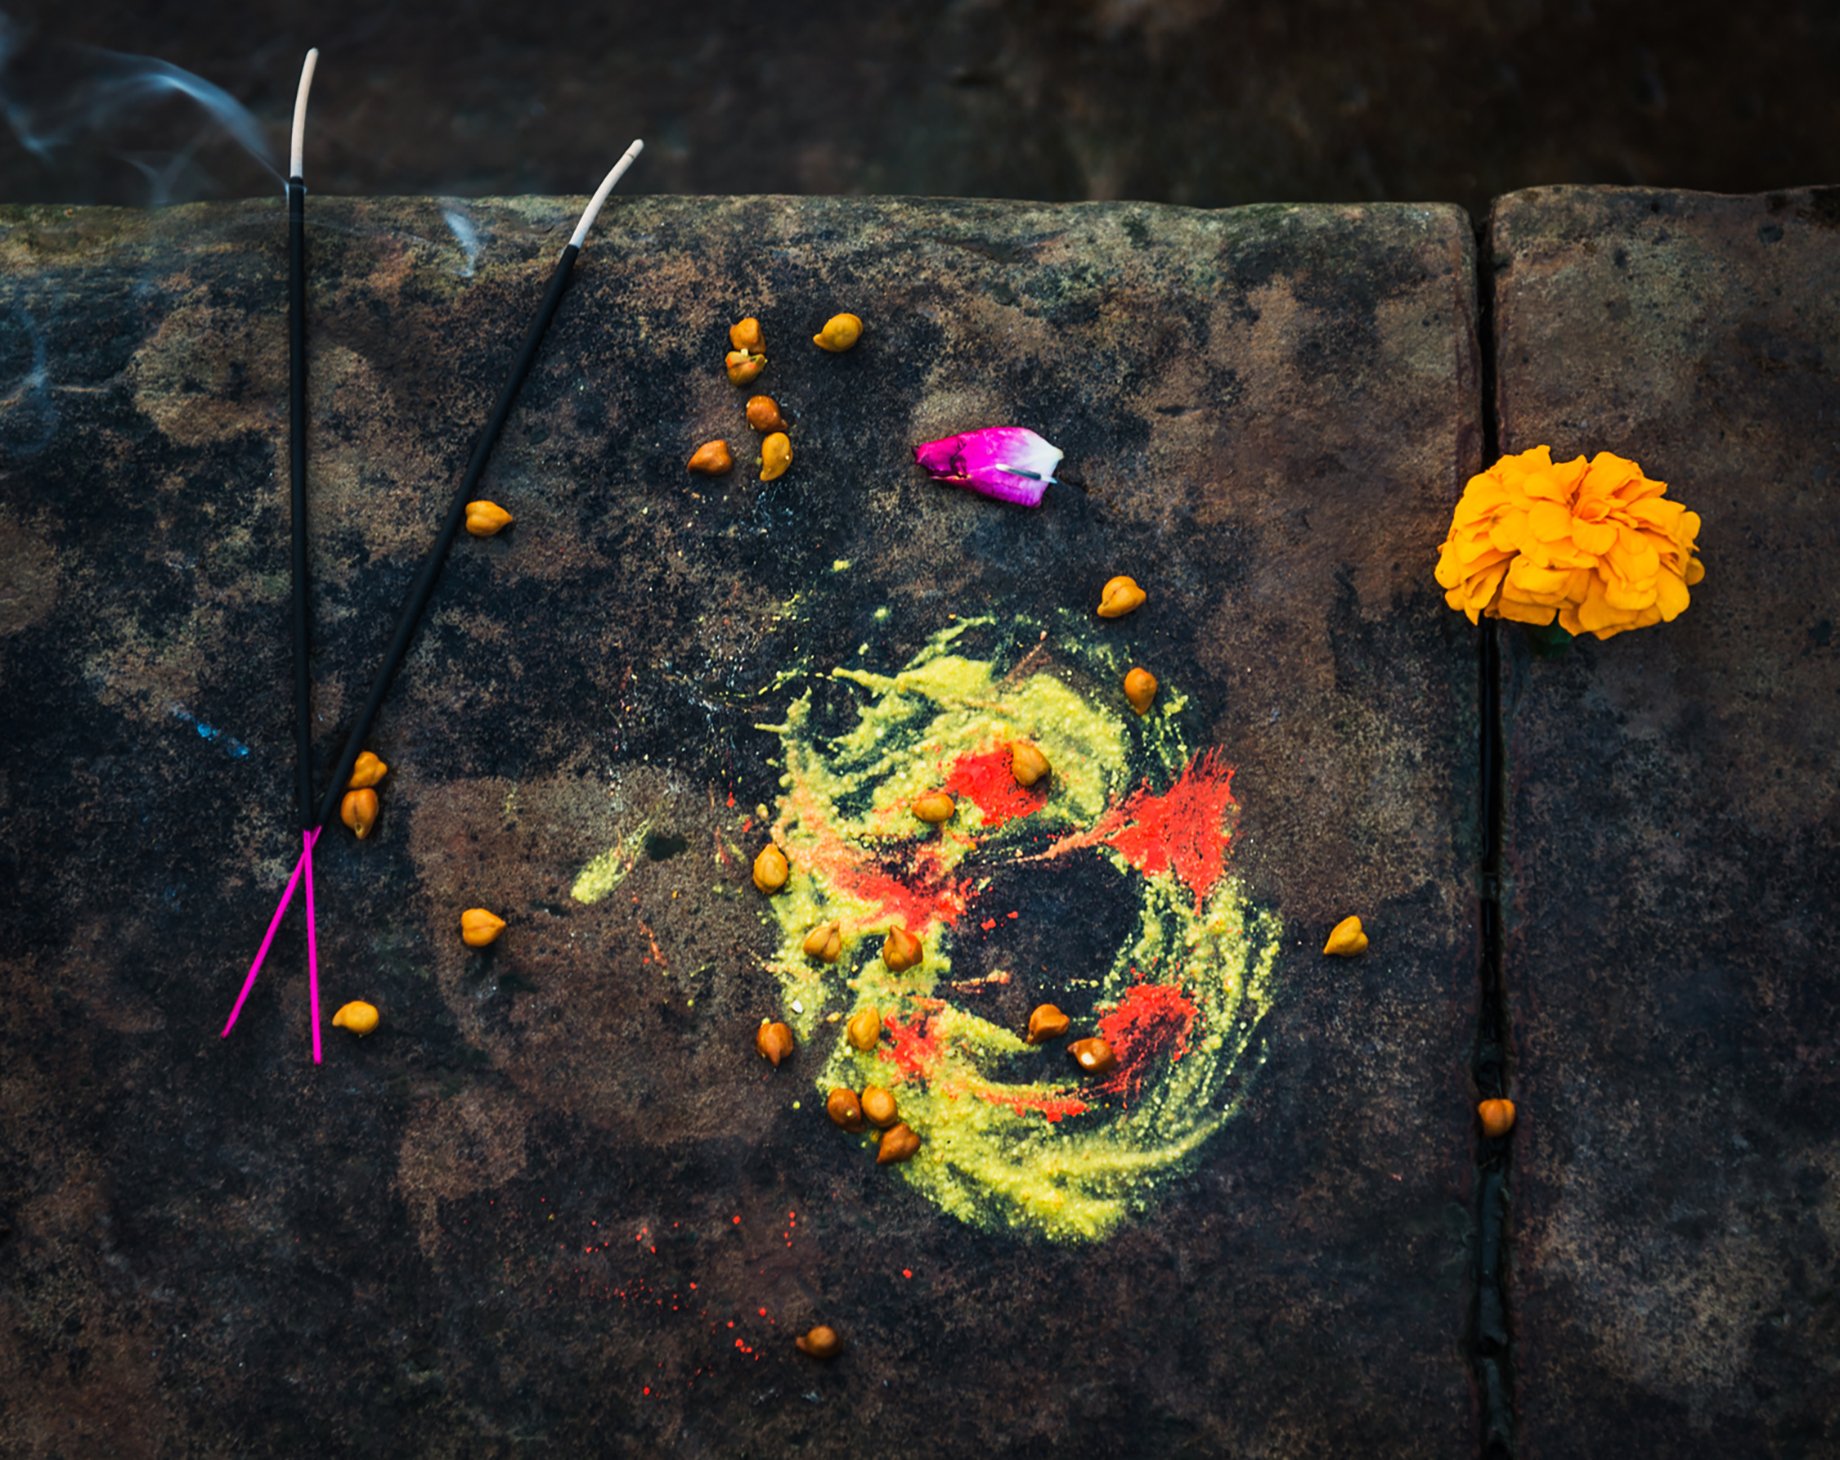 Incense, flowers, and colorful dyes shot by Michael Marquand for Lodestars Anthology.